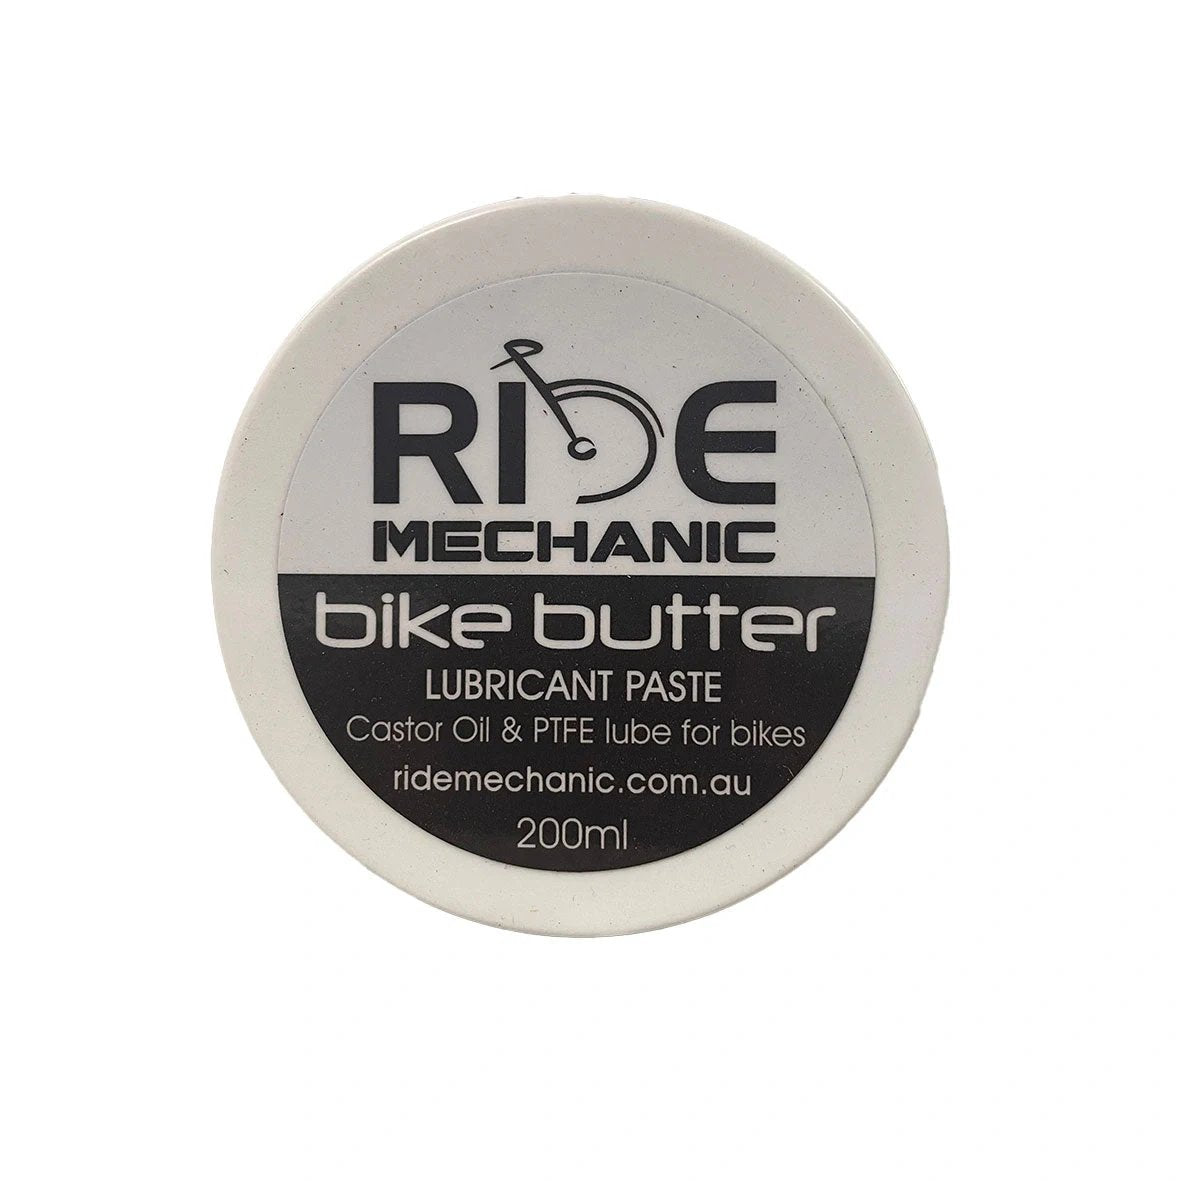 Ride-M Bike Butter 200Ml Lubricant - Bicycle Chain Lubricant